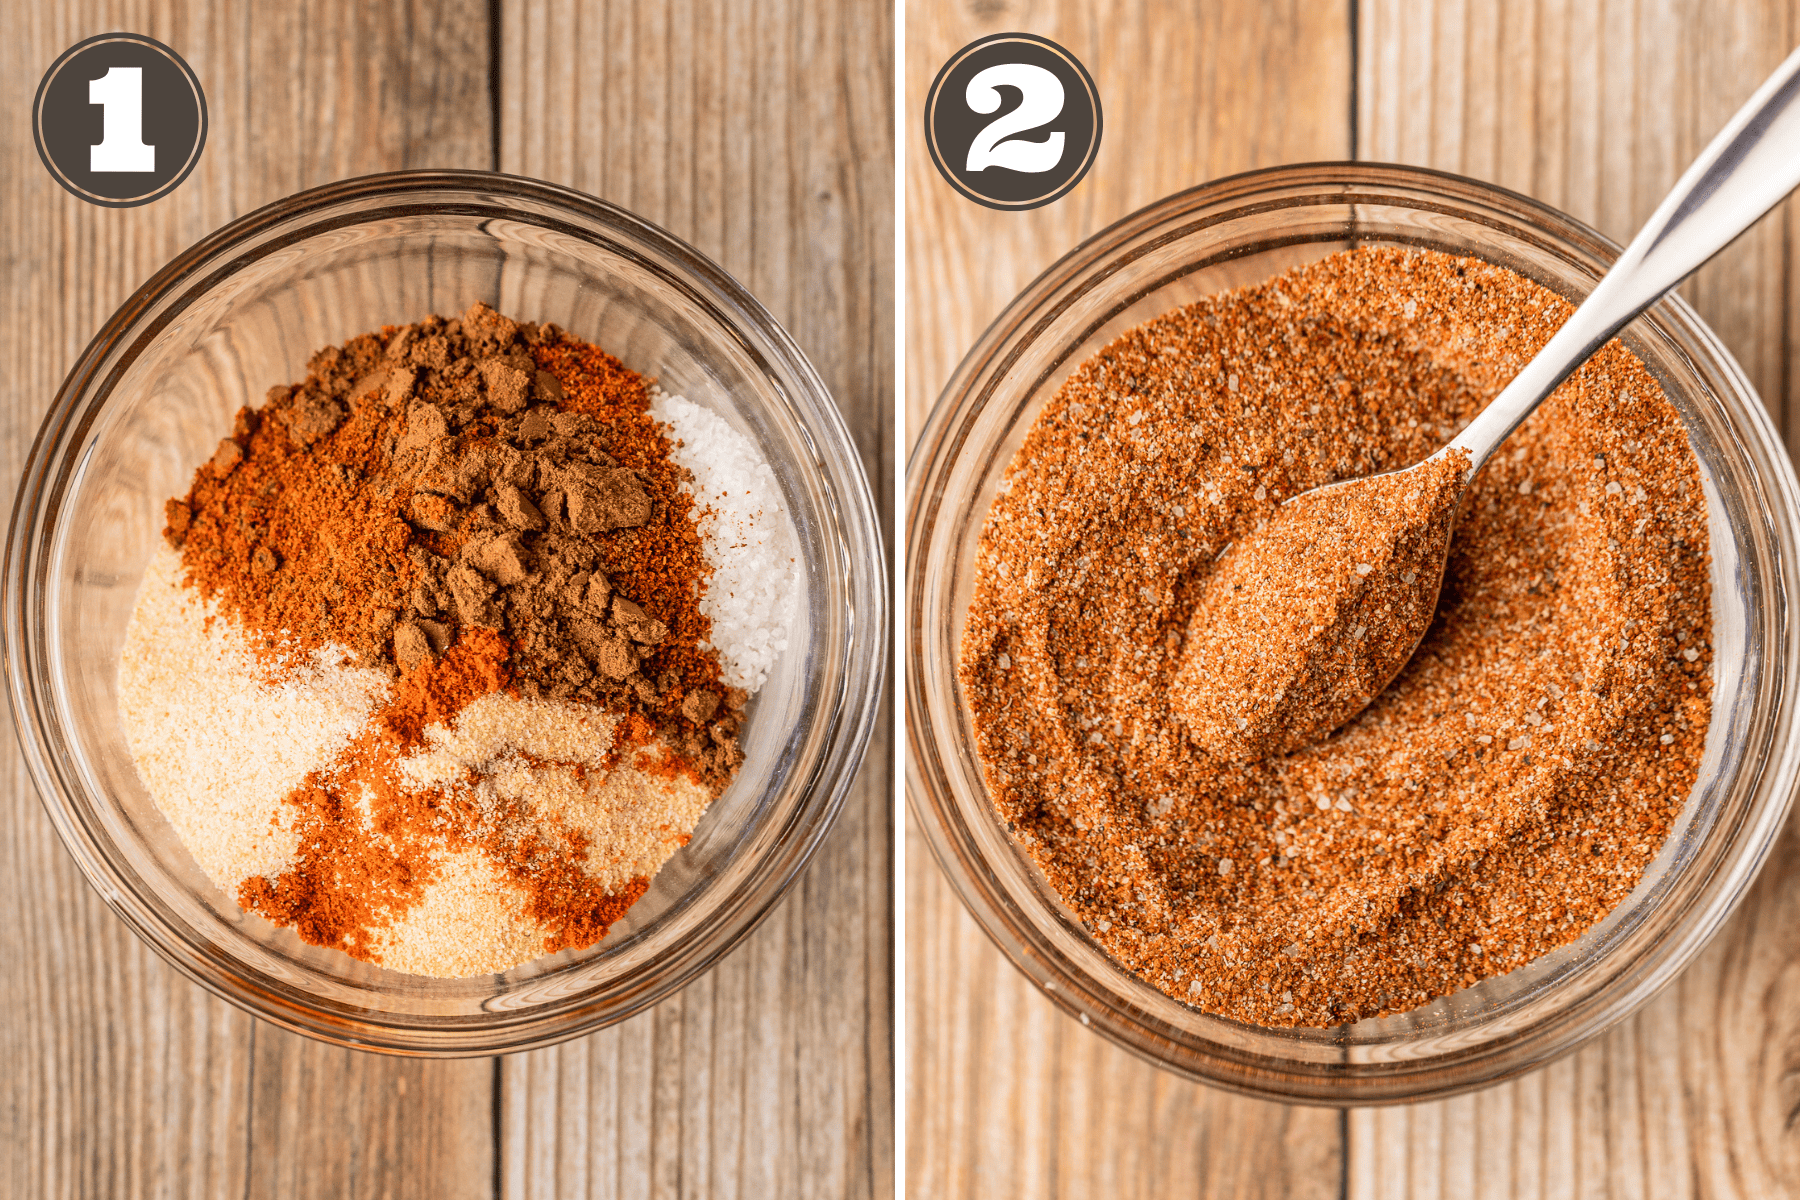 Side by side photos of chicken dry rub before and after the spices are mixed in a small glass bowl on a wood background.